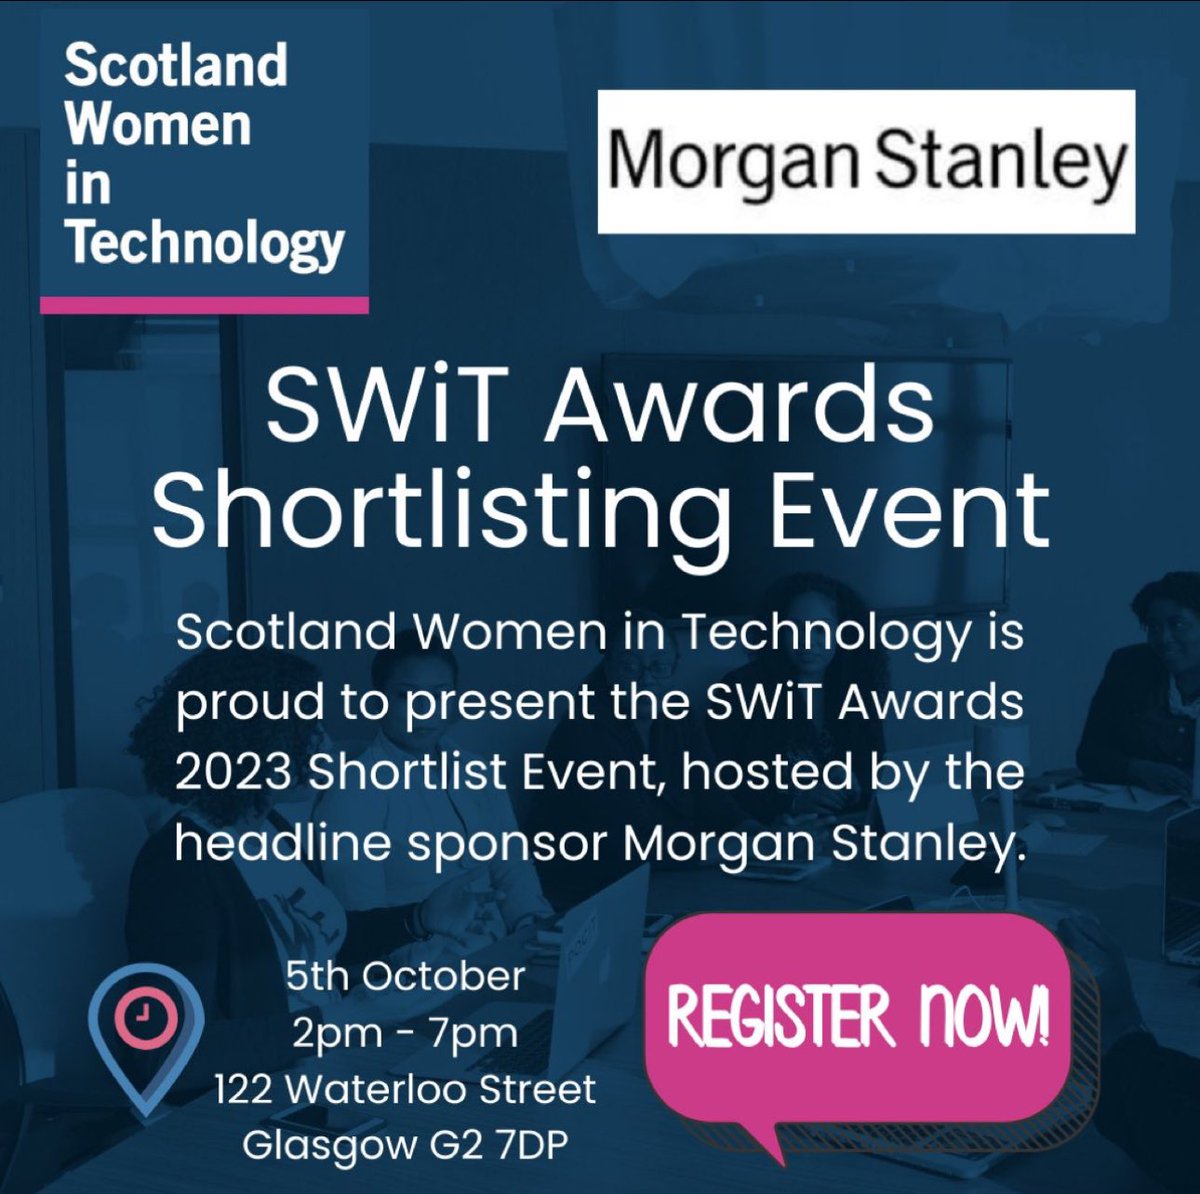 Don't miss out! Limited spots left for the #SWiTAwards2023 shortlist event on 5th Oct hosted by @MorganStanley- join us for Tech Talks, a panel discussions and the exciting shortlisting announcement. Secure your place now ➡️ lnkd.in/e77iWwt9 #WomenInTech